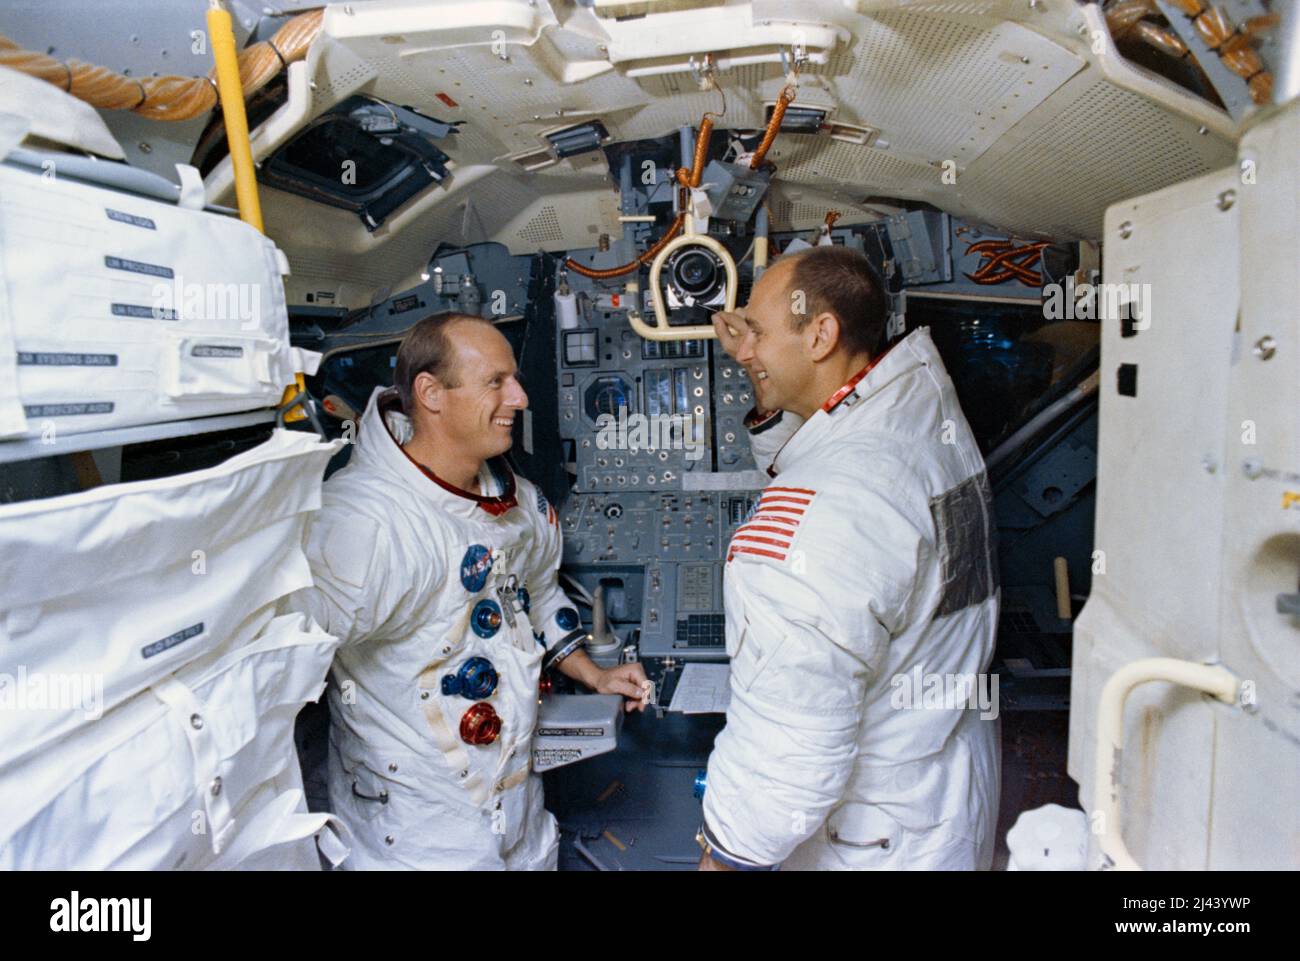 Astronauts Charles Conrad (on left), commander; and Alan Bean, lunar module pilot, in the Apollo Lunar Module Mission Simulator during simulator training at the Kennedy Space Center (KSC). Stock Photo